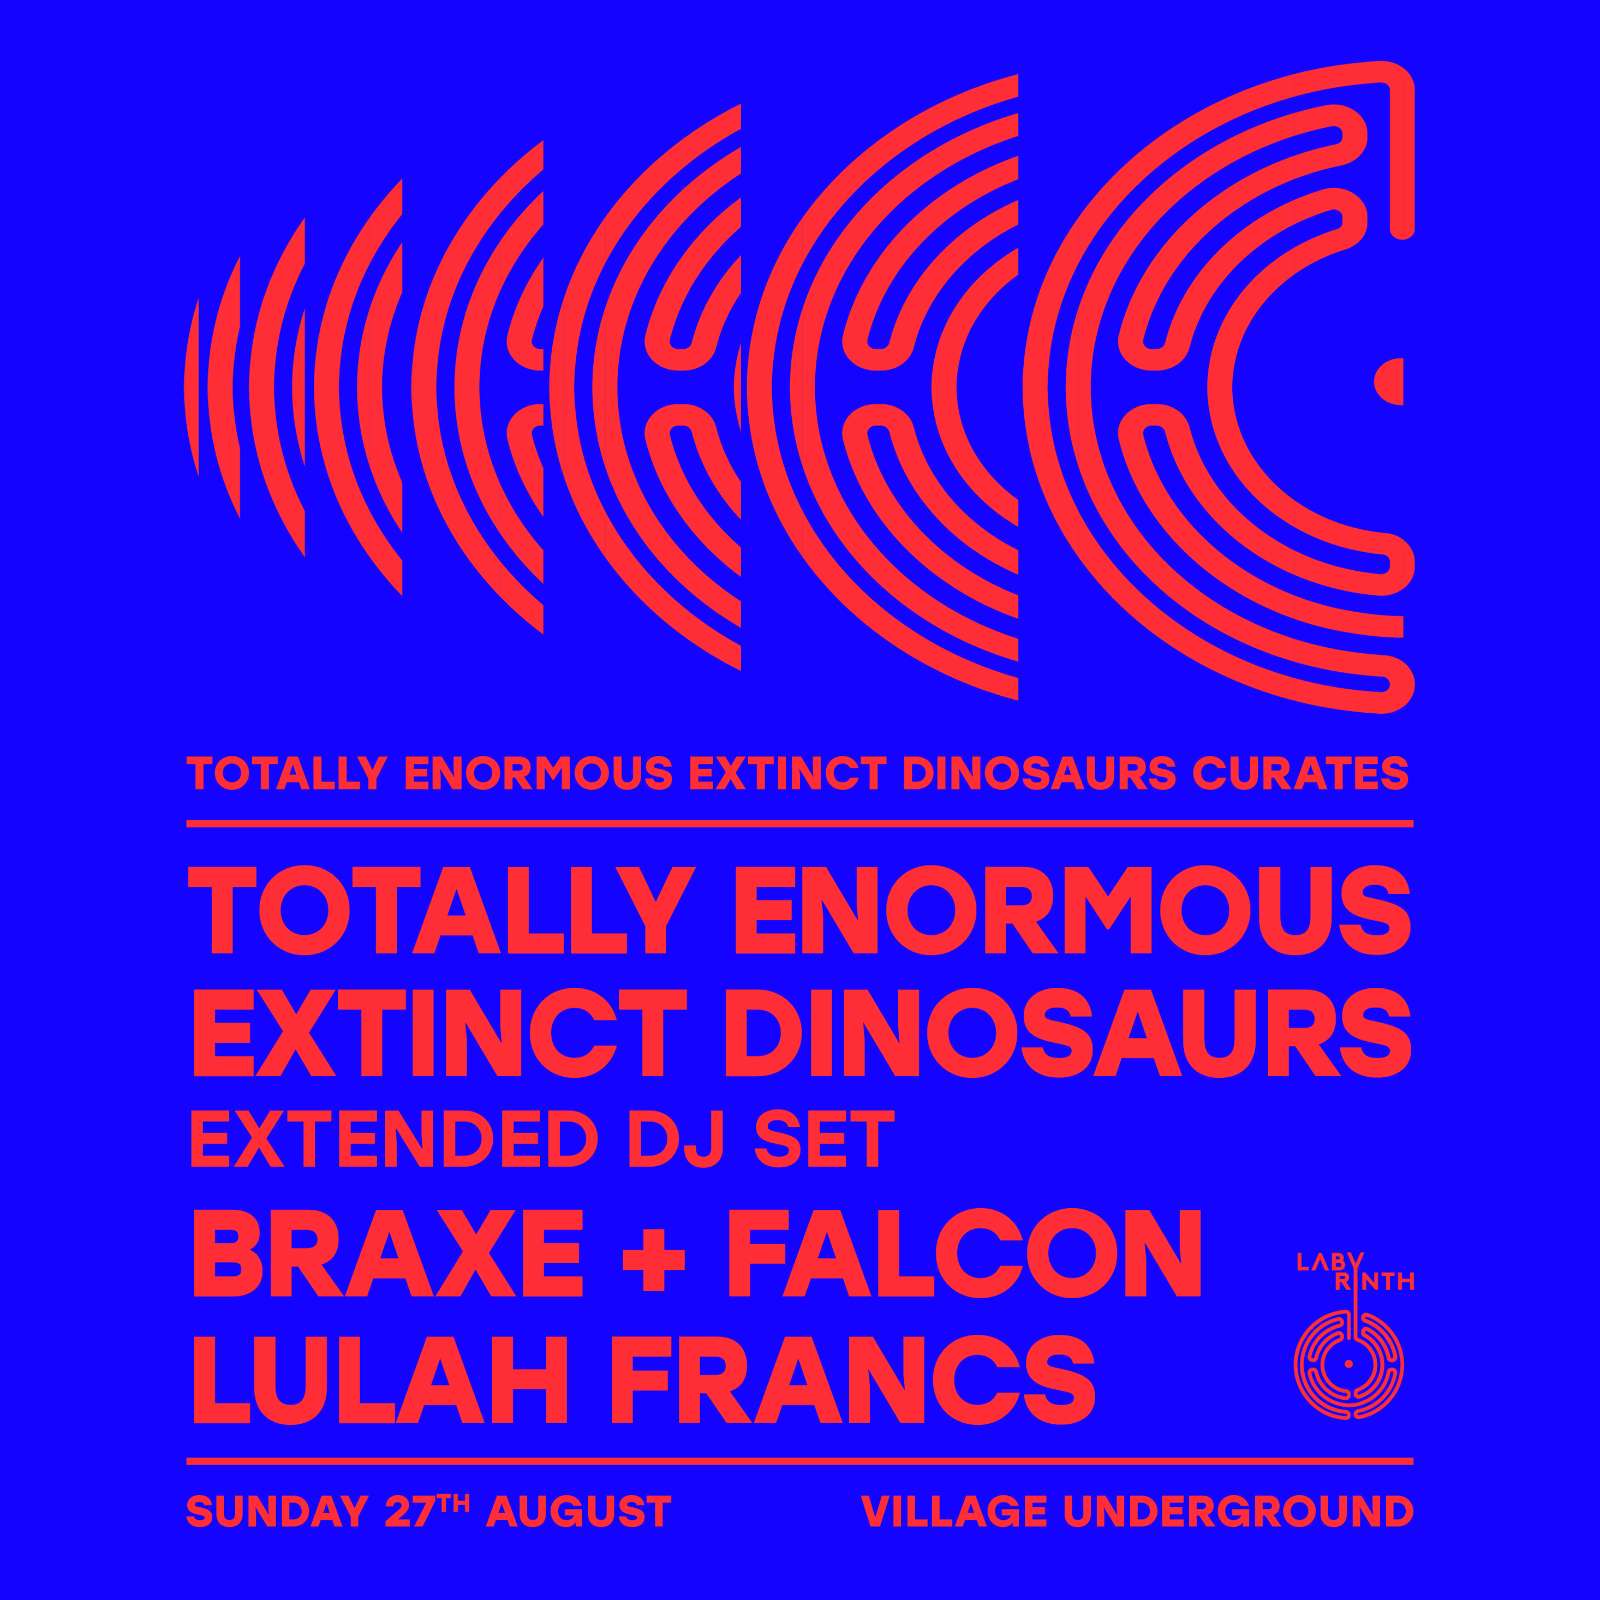 Totally Enormous Extinct Dinosaurs Curates